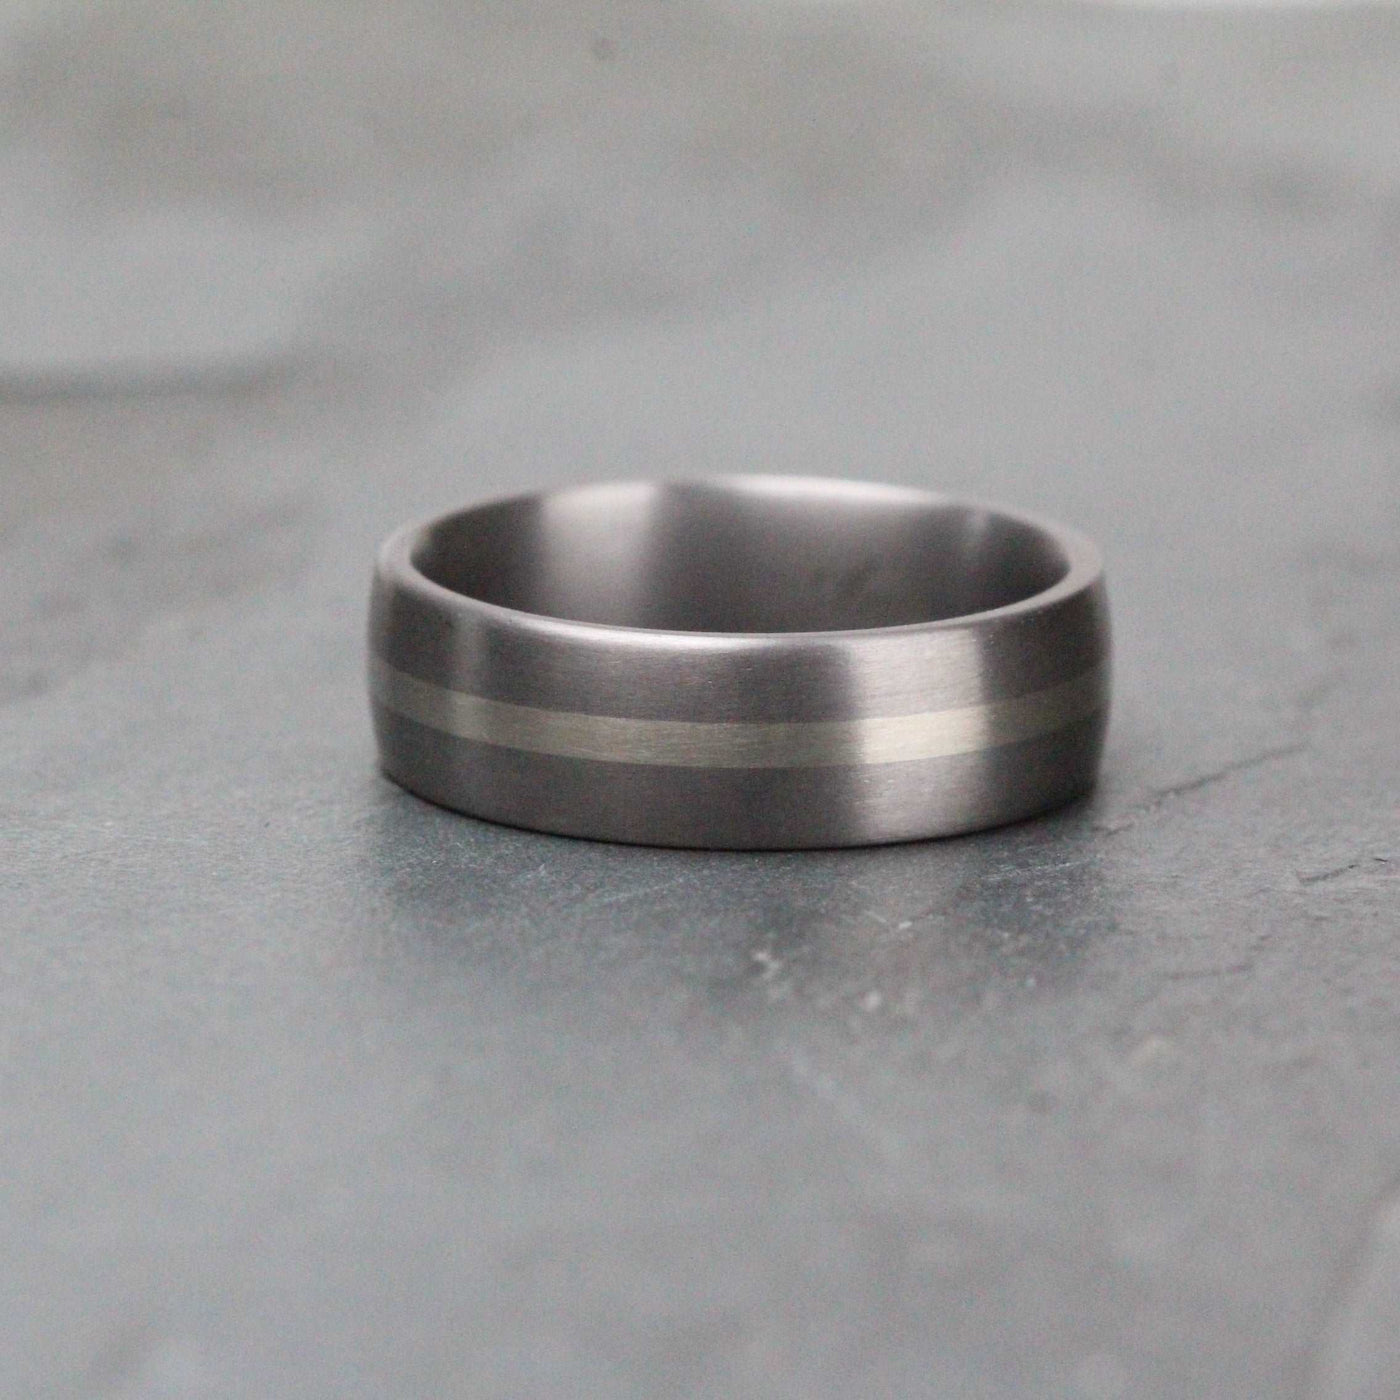 tantalum and Palladium wedding ring in a brushed finish 7mm wide